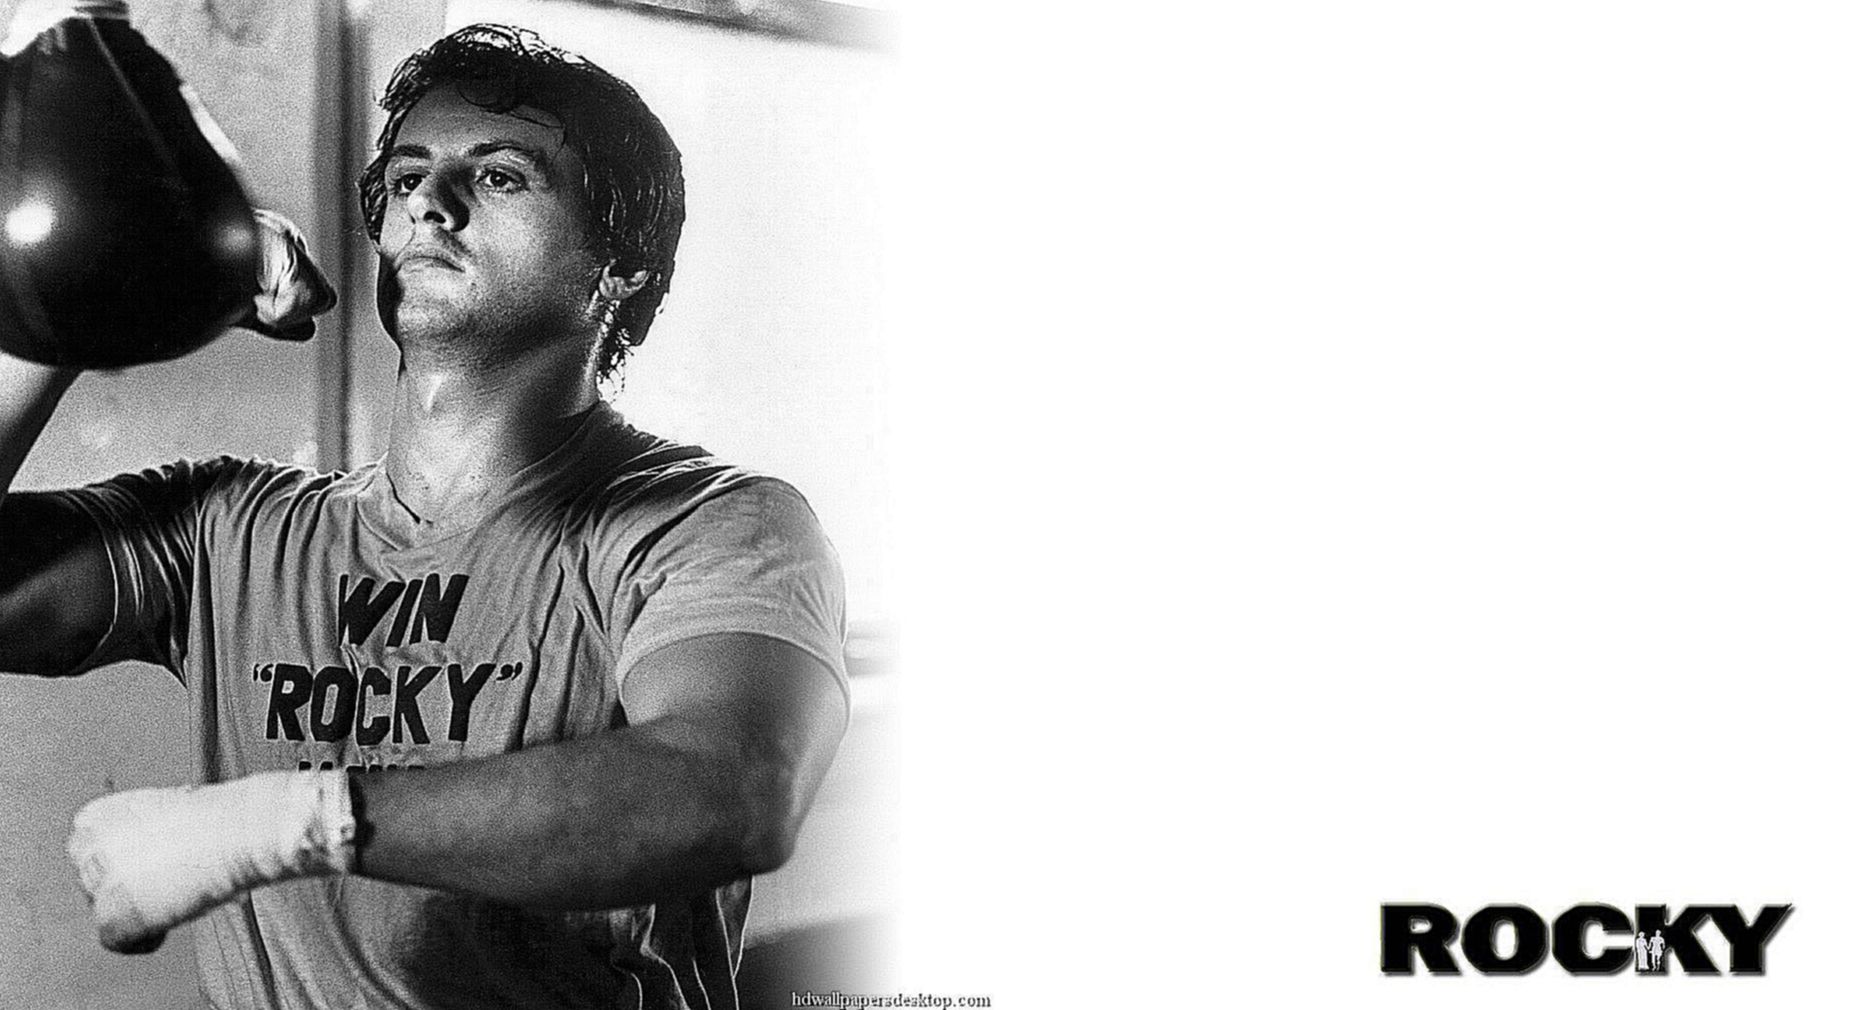 Rocky balboa wallpapers for mobile on Wallpapers Bros